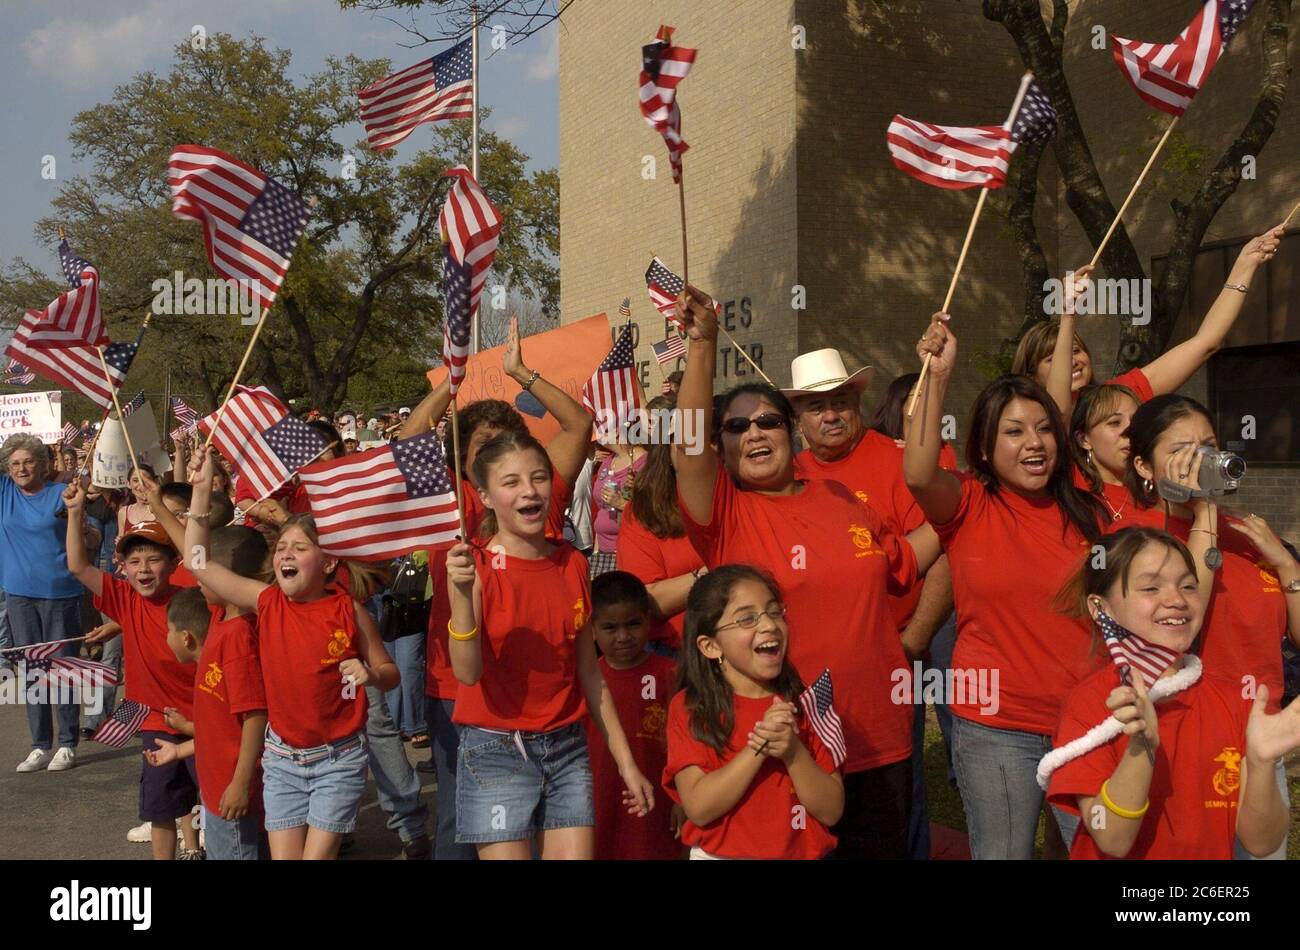 Austin, Texas USA, March 31, 2005: Excited family members wave American flags during a homecoming celebration for the 123rd Weapons Company, United States Marine Reserve unit from Camp Mabry, Texas.  ©Bob Daemmrich Stock Photo